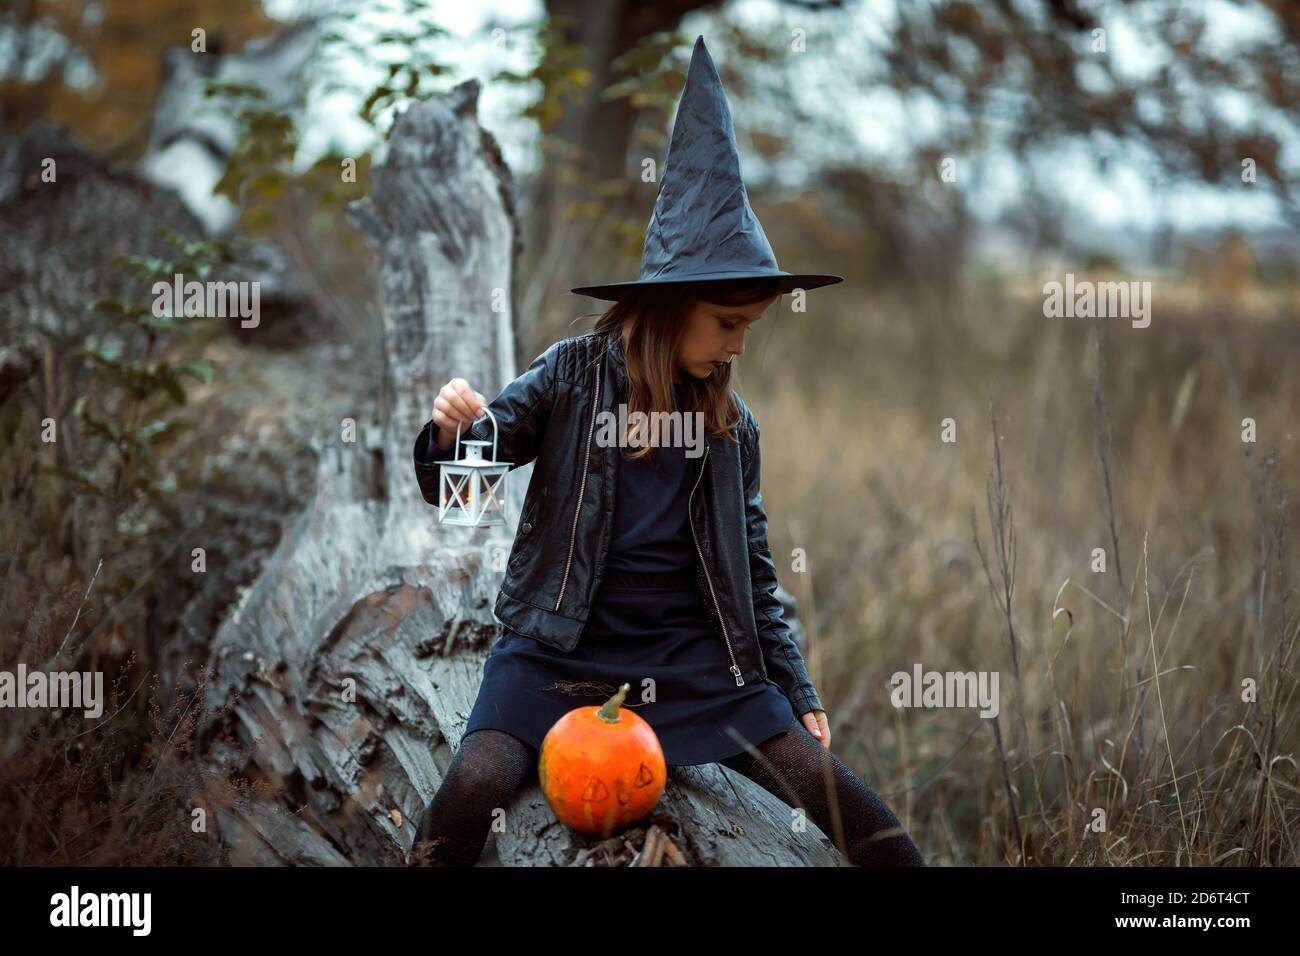 Cute teen girl in a Halloween costume outside holding lights and an orange pumpkin in her hands. Stock Photo